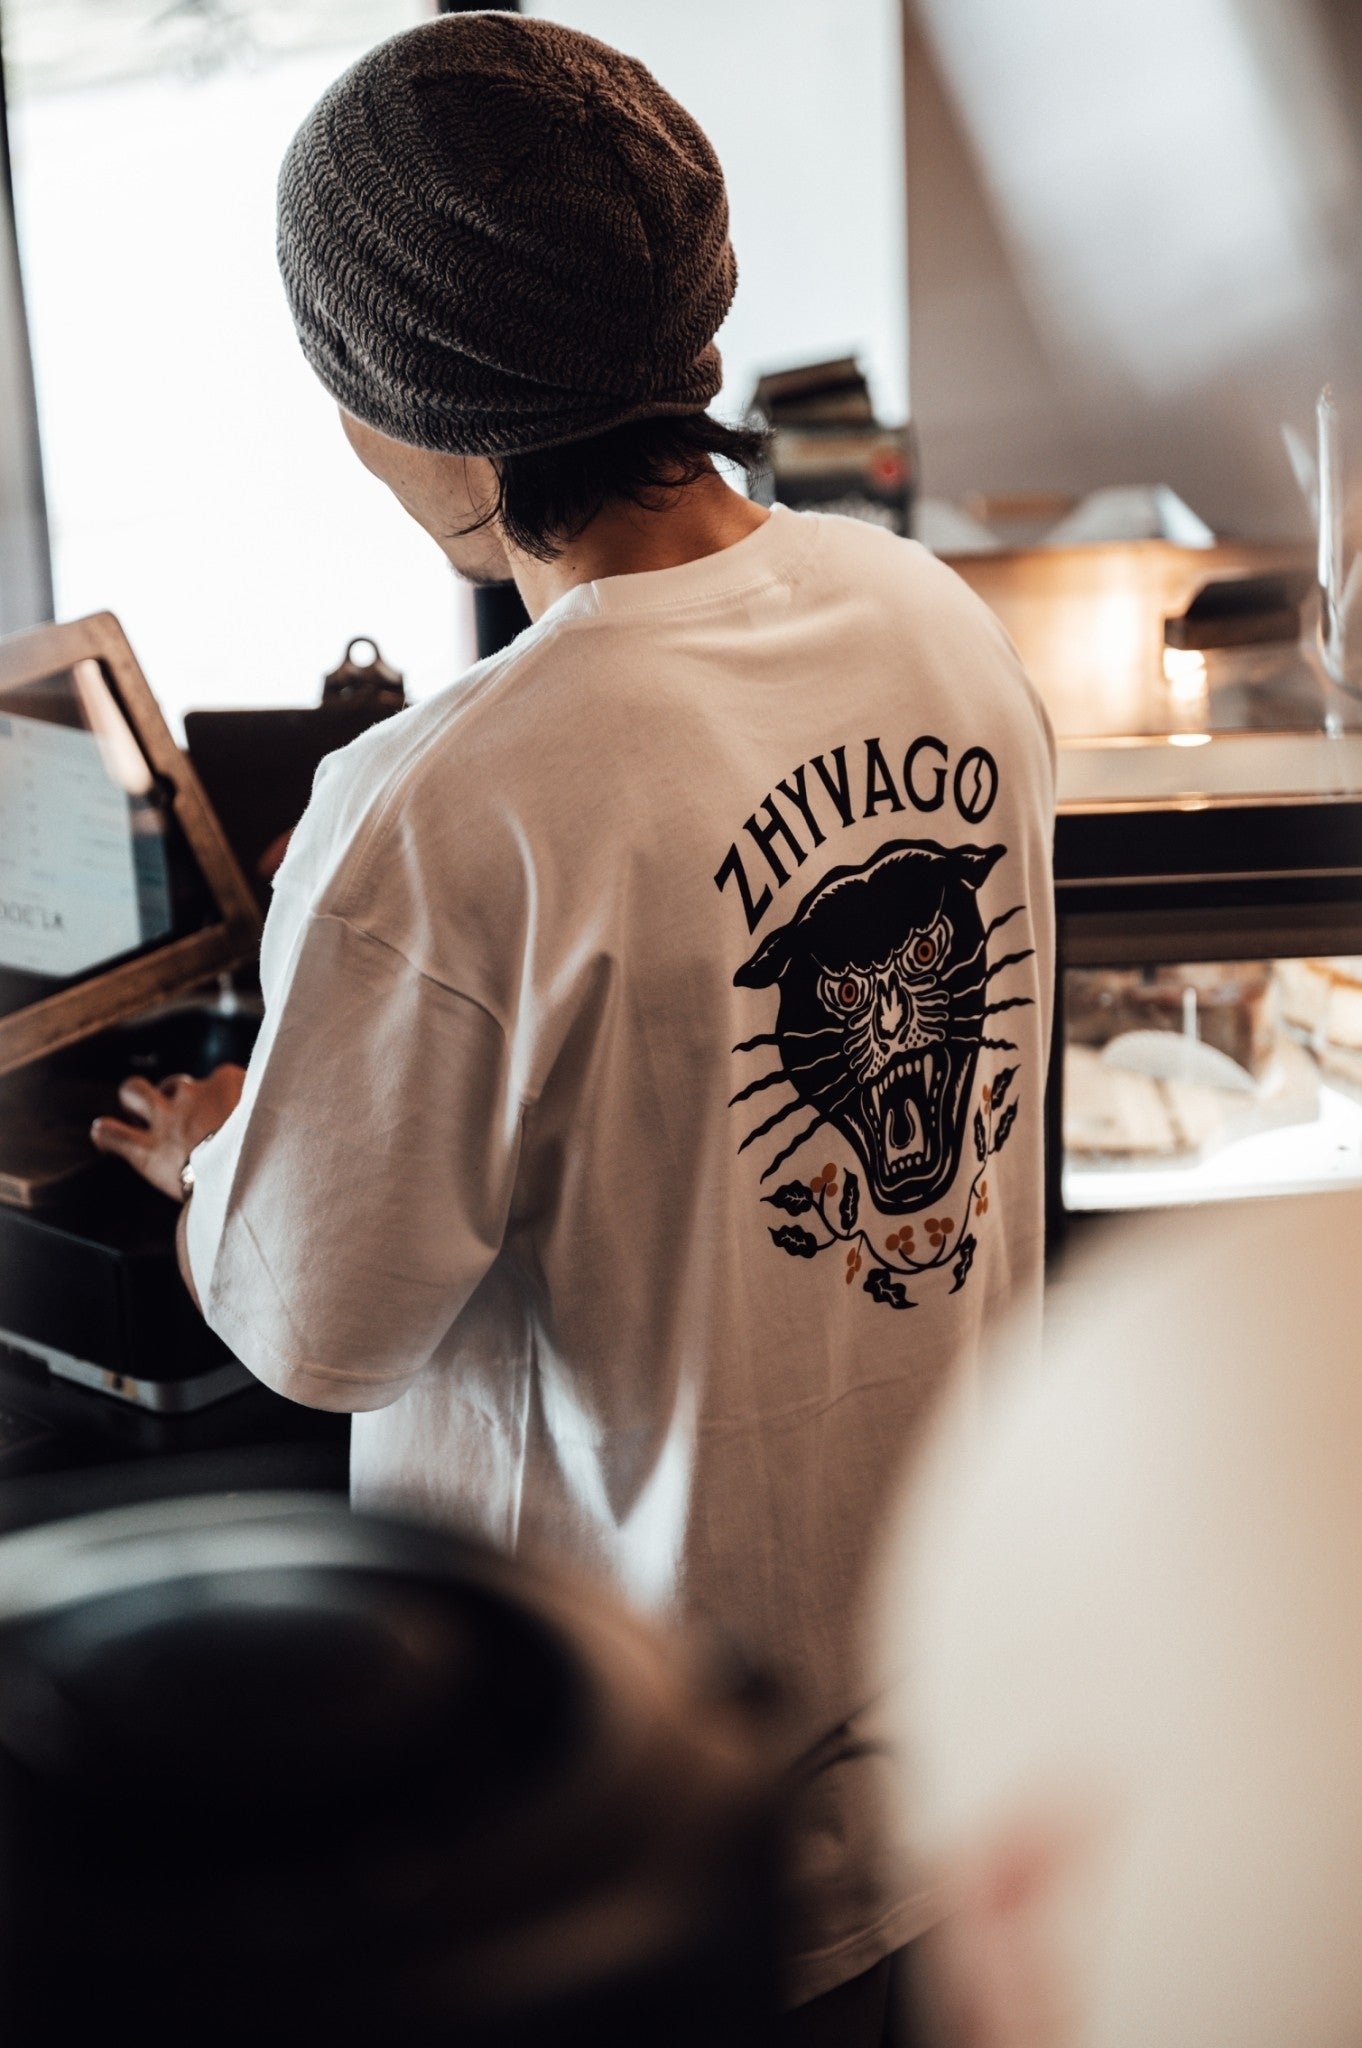 The Black Panther BARISTAS Tシャツ – Zhyvago Coffee Roastery